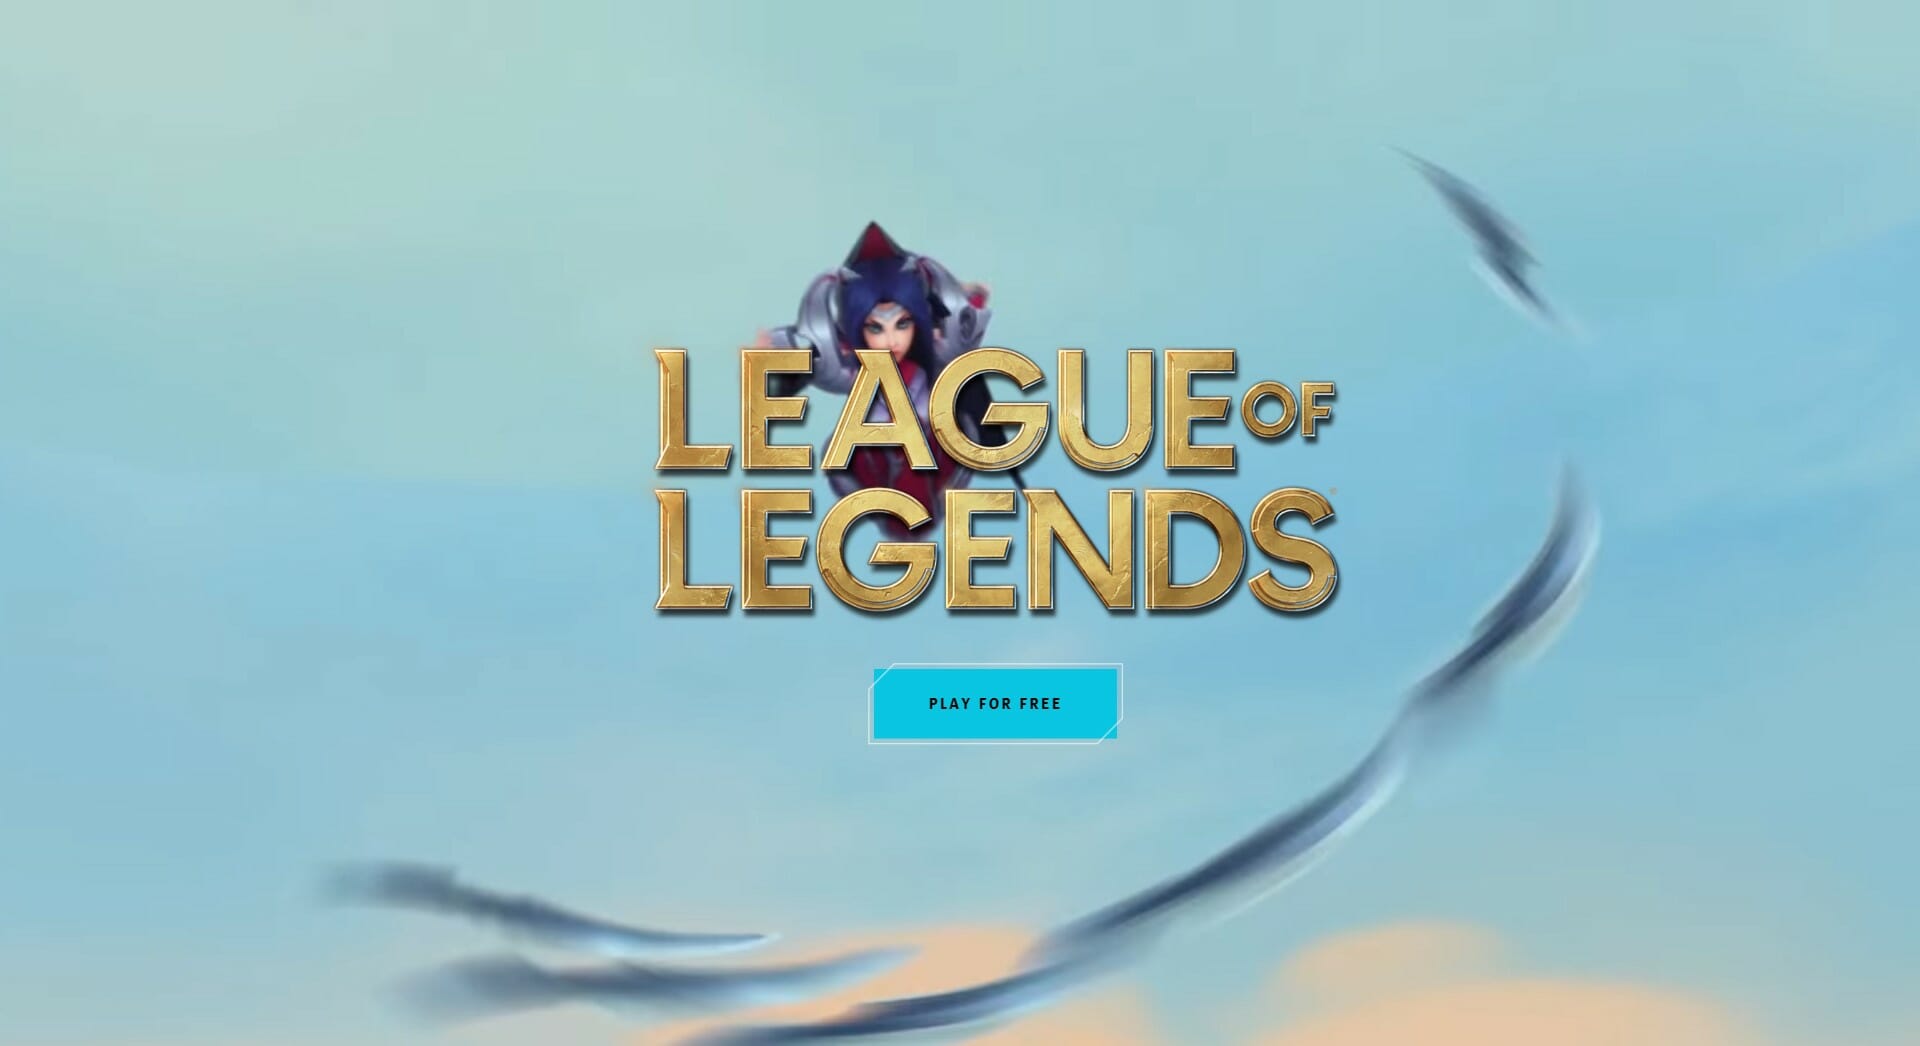 How to Play League of Legends